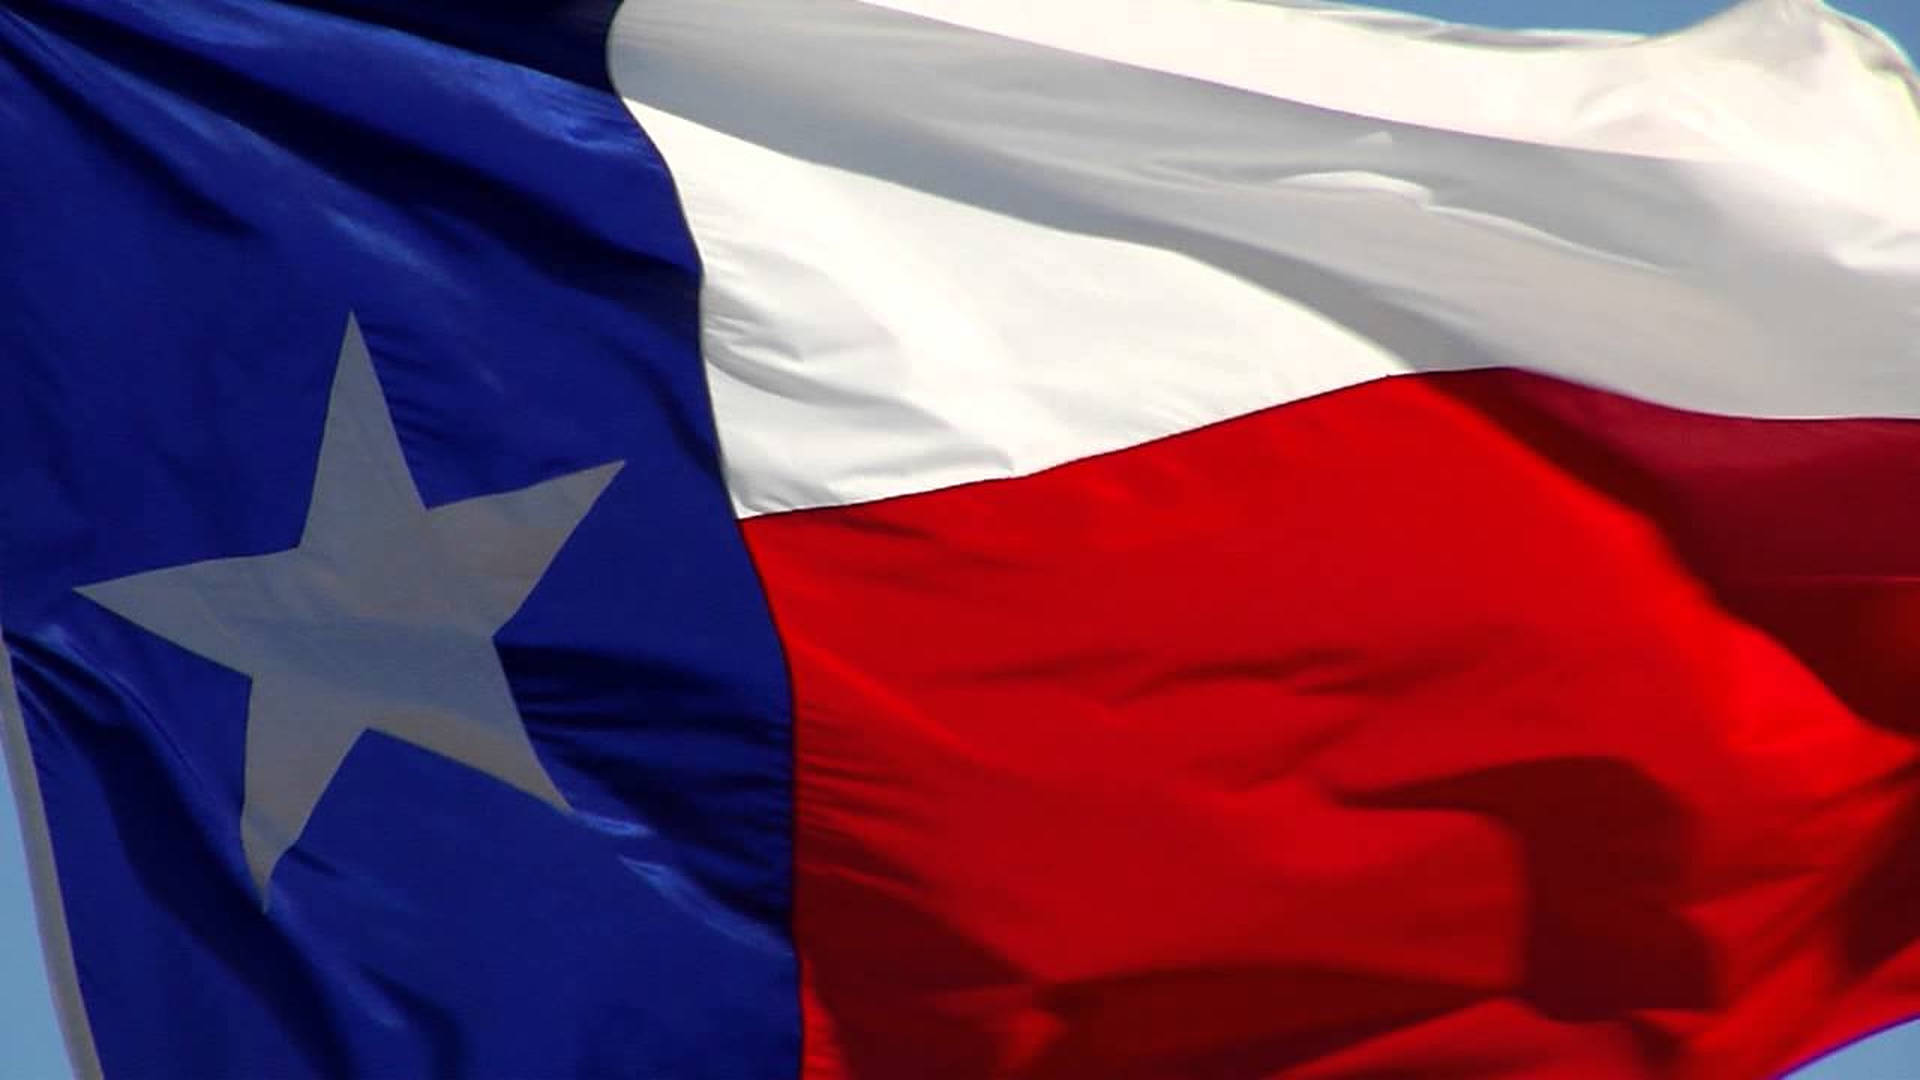 Texas Flag Close Up: Spirit Of The Lone Star State